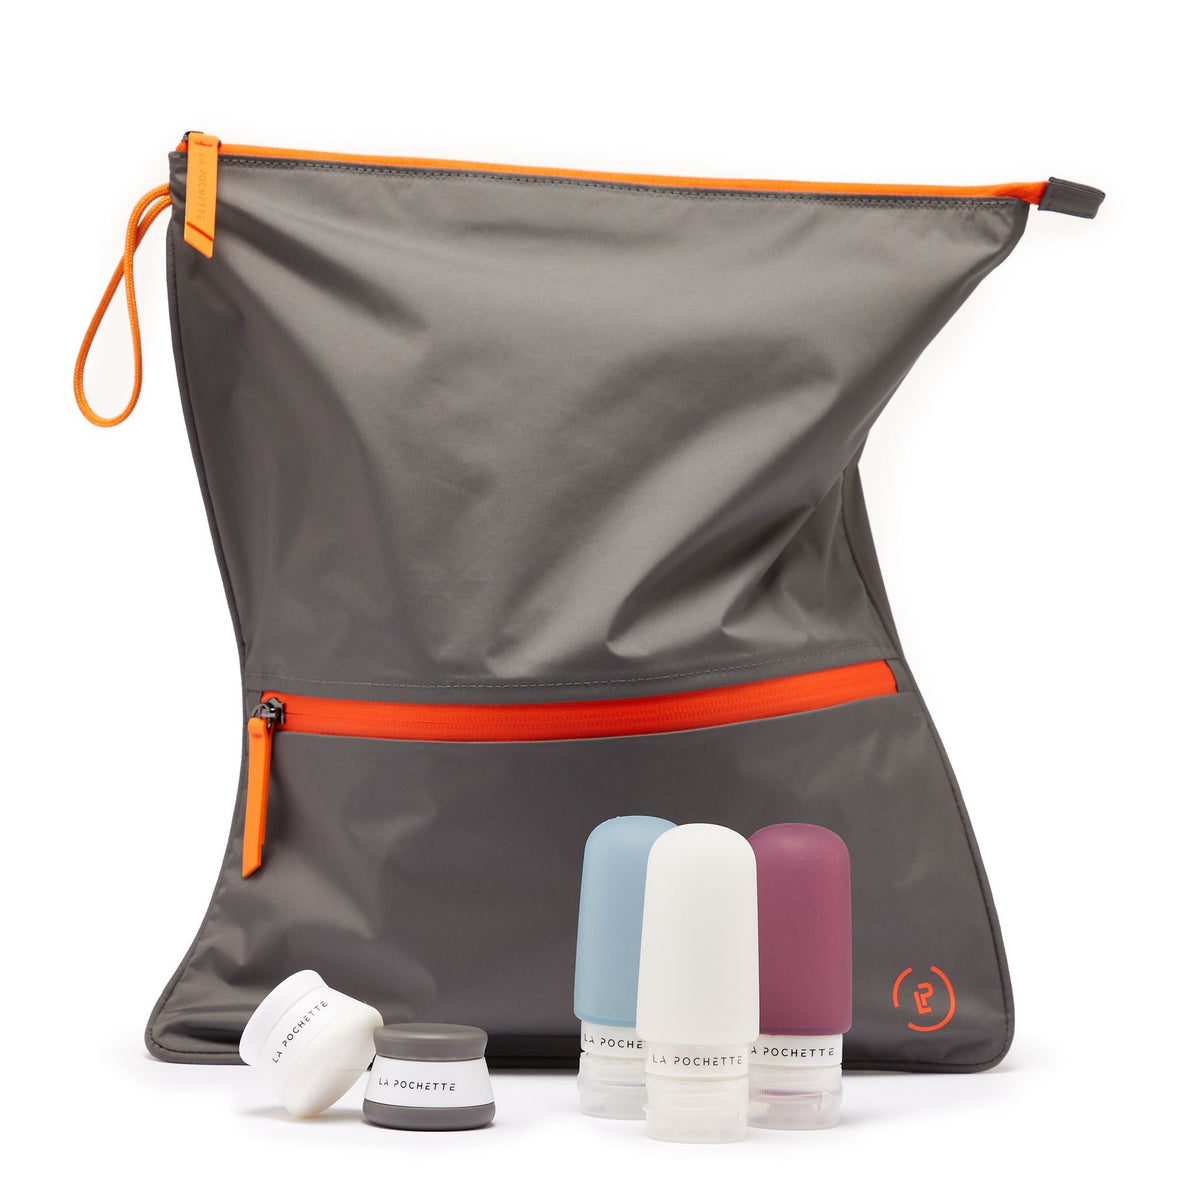 Pewter Flame Sweat Bag Bundle with travel pots and travel bottles